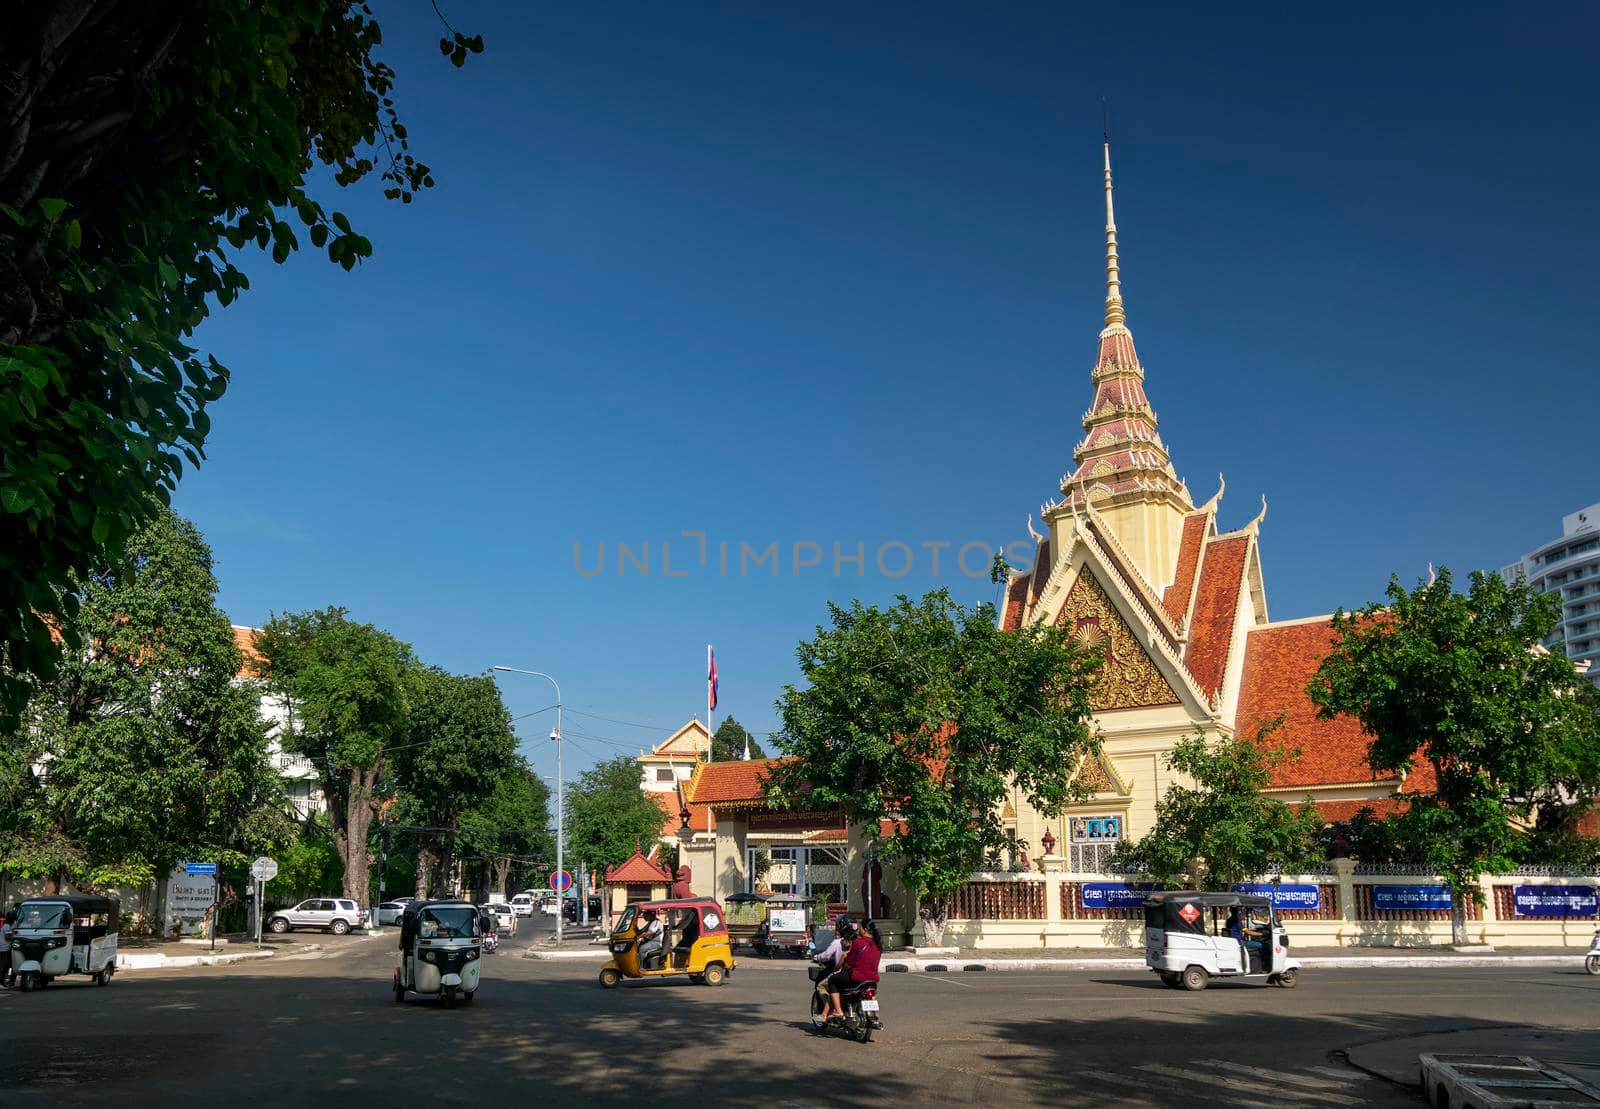 courthouse and street view of  downtown phnom penh city cambodia by jackmalipan